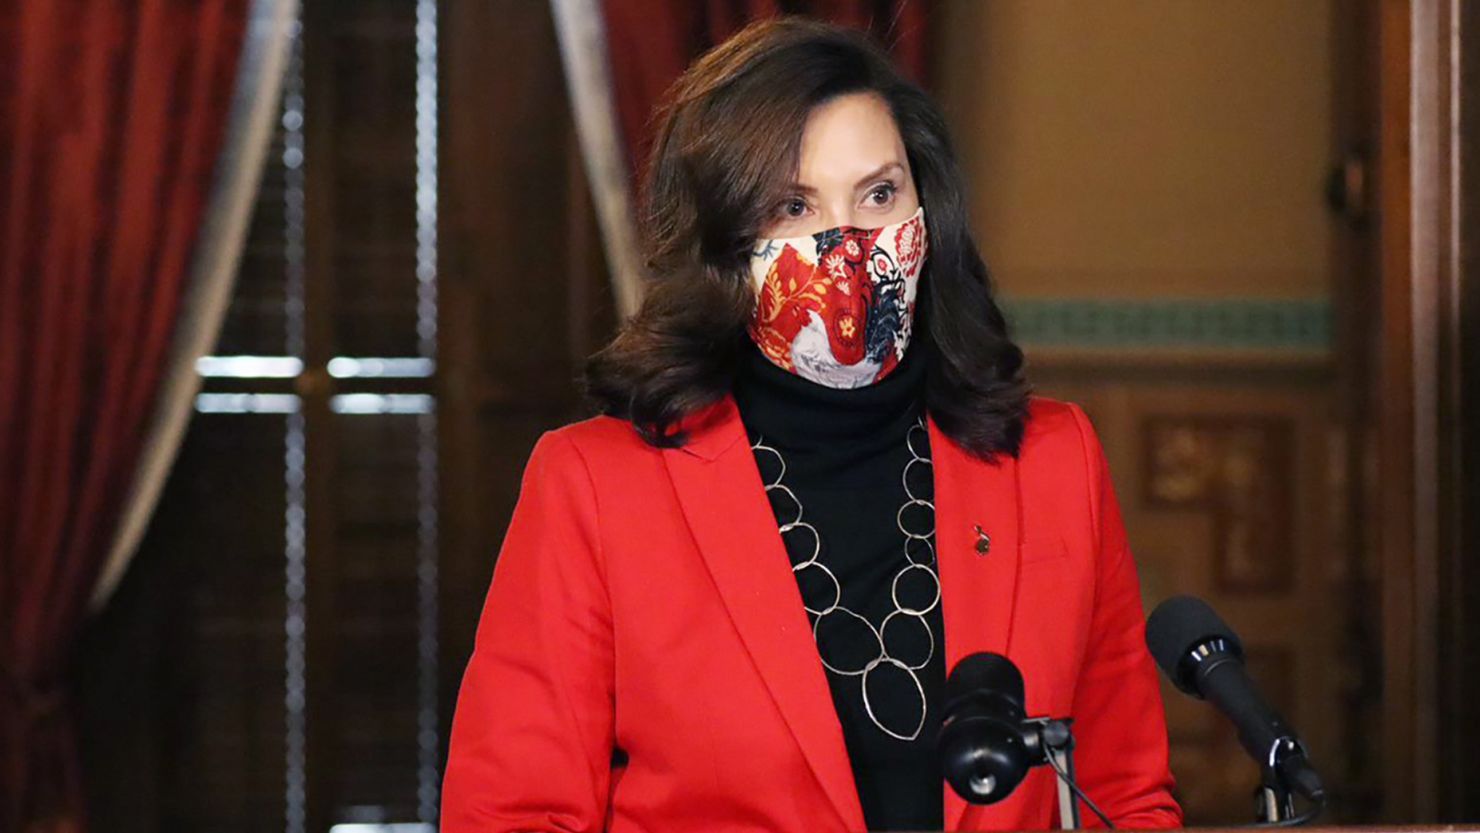 Michigan Gov. Gretchen Whitmer discusses the Covid-19 pandemic in Lansing on December 15, 2020.